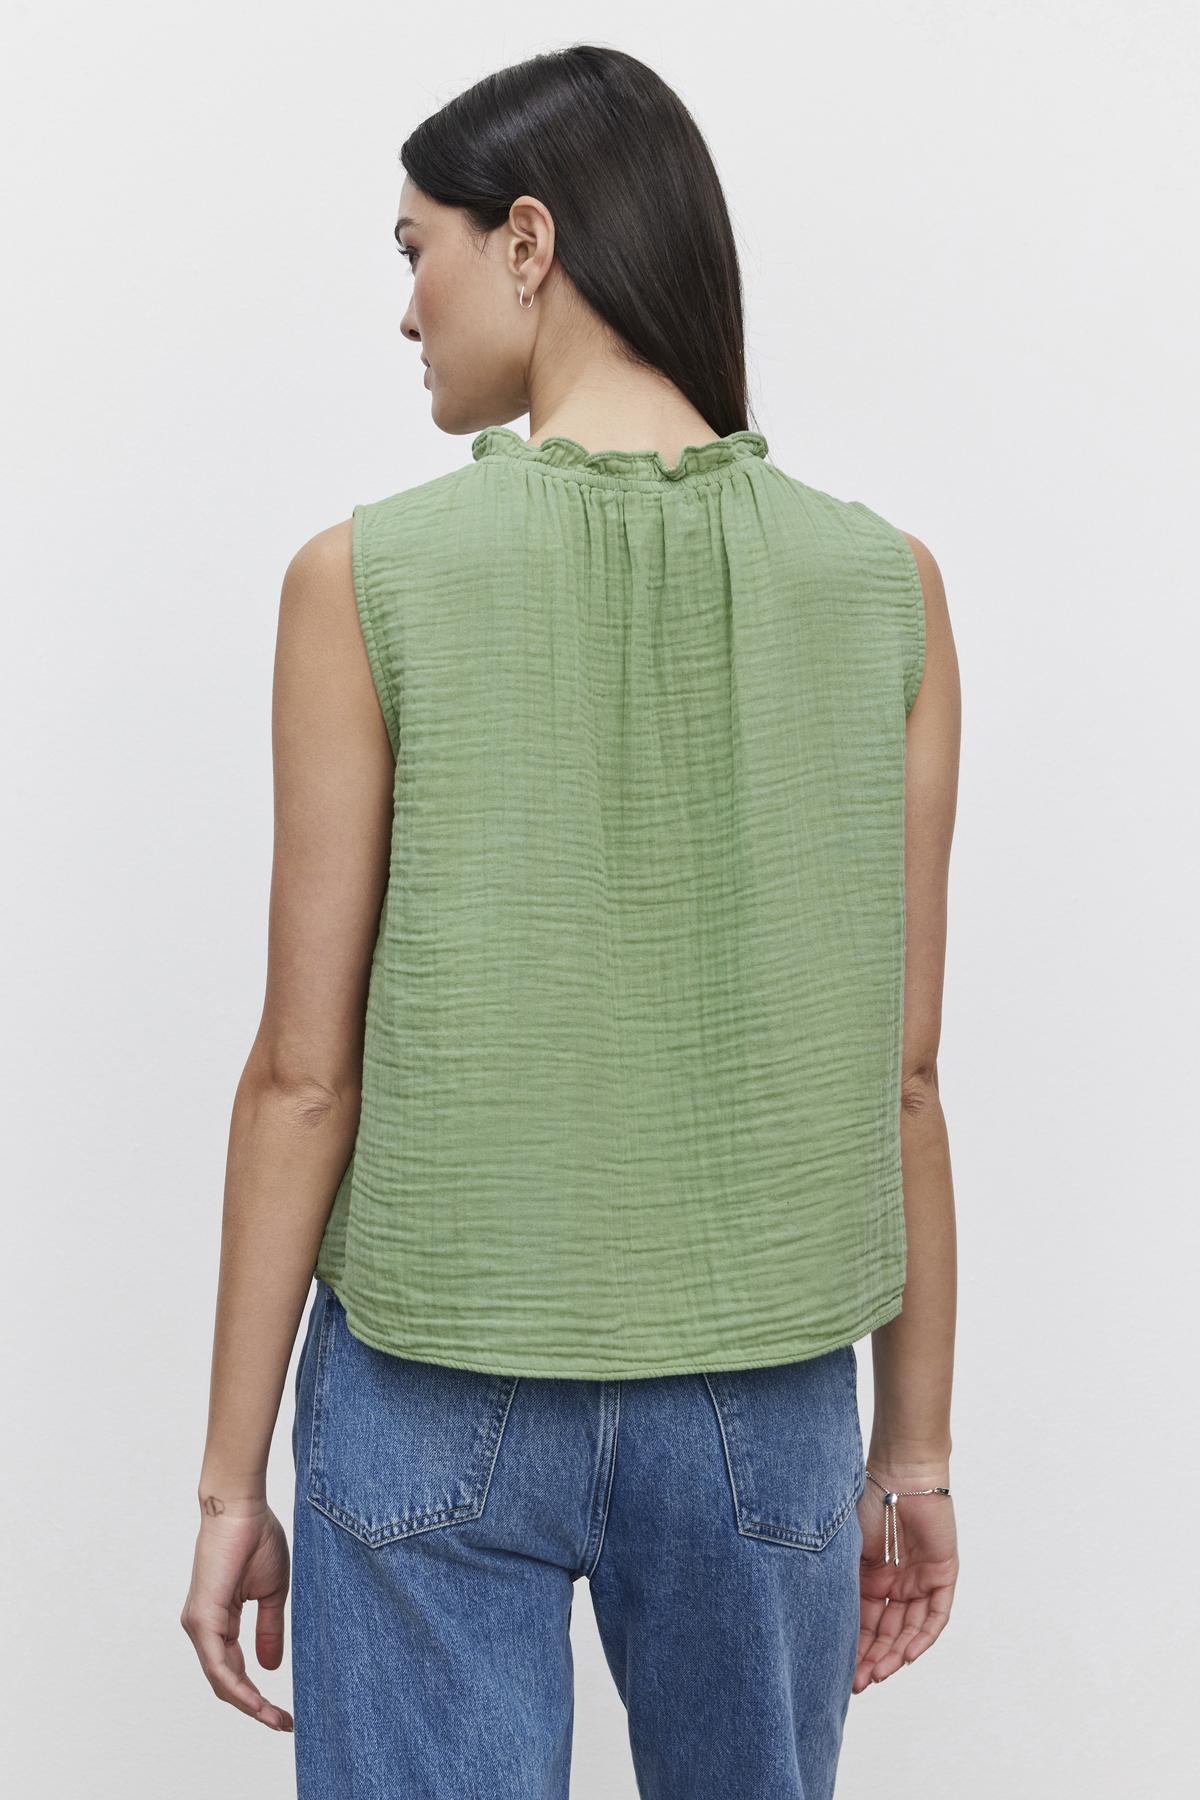 A woman seen from behind wearing a Velvet by Graham & Spencer BIANCA COTTON GAUZE TANK TOP with an elastic neckline and blue jeans.-36443616248001